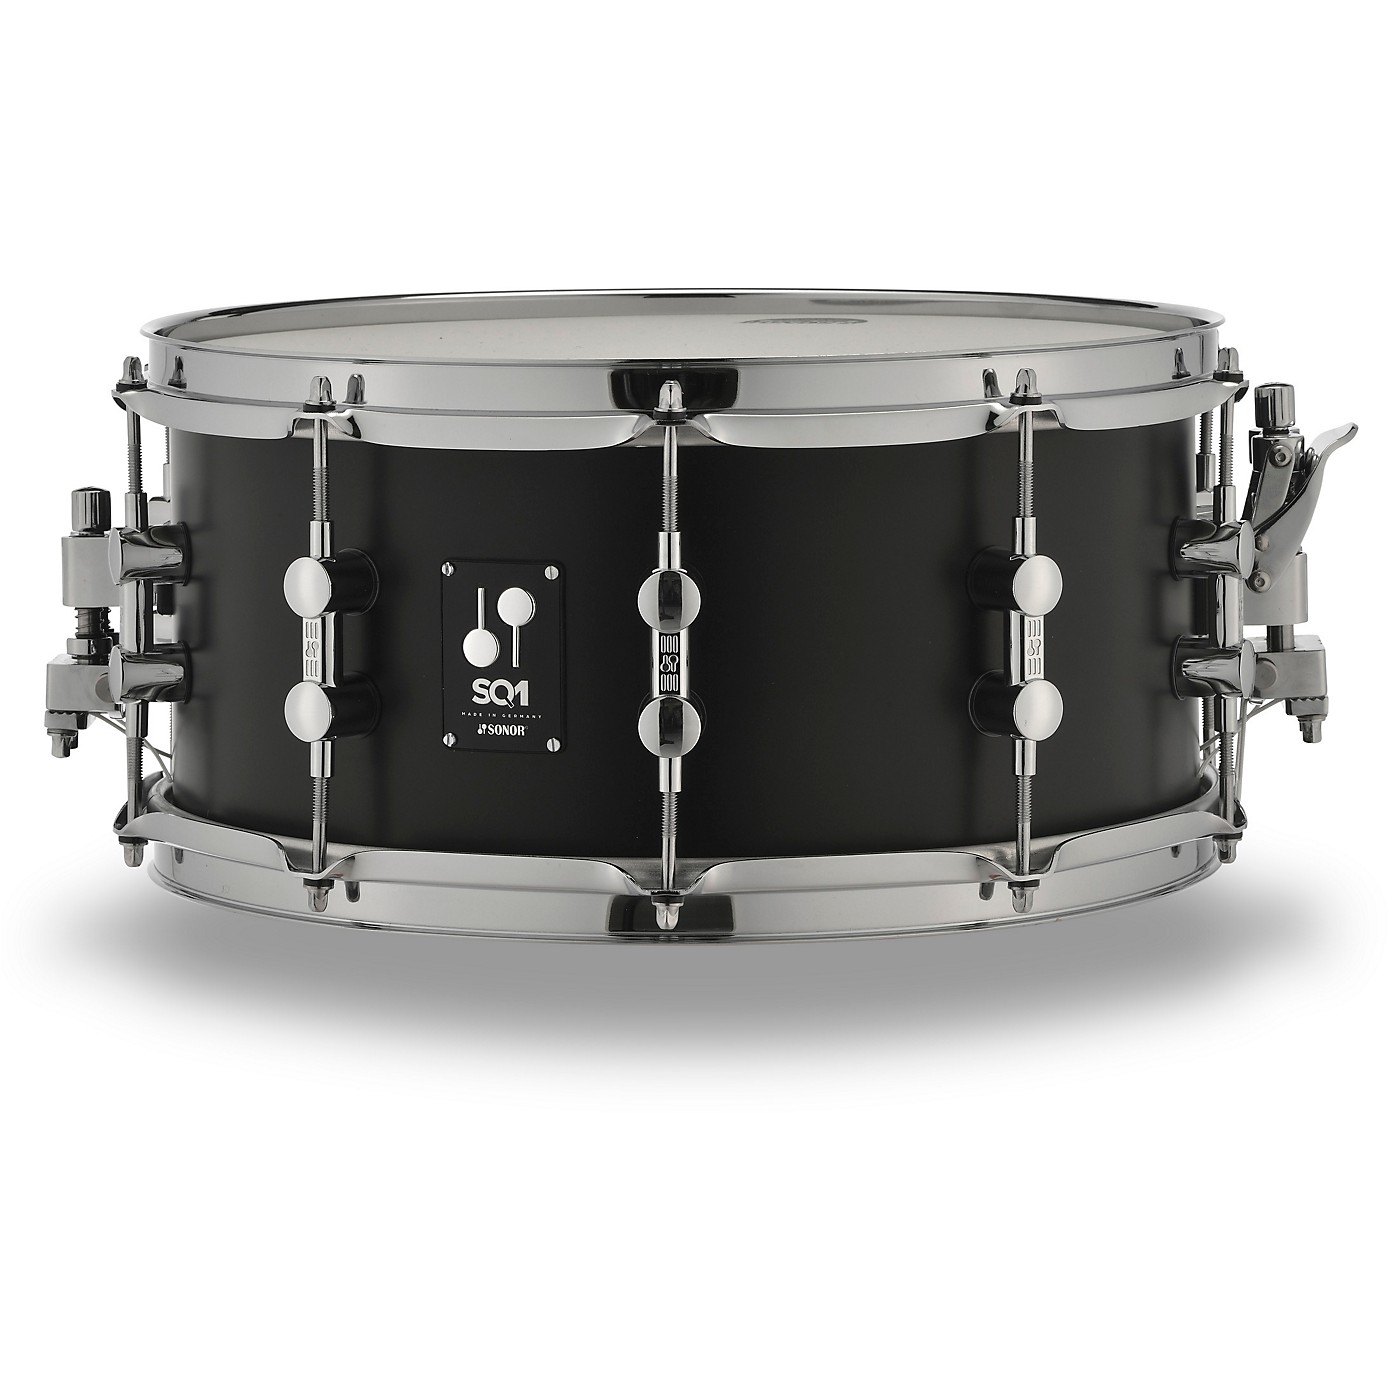 SONOR SQ1 Snare Drum thumbnail